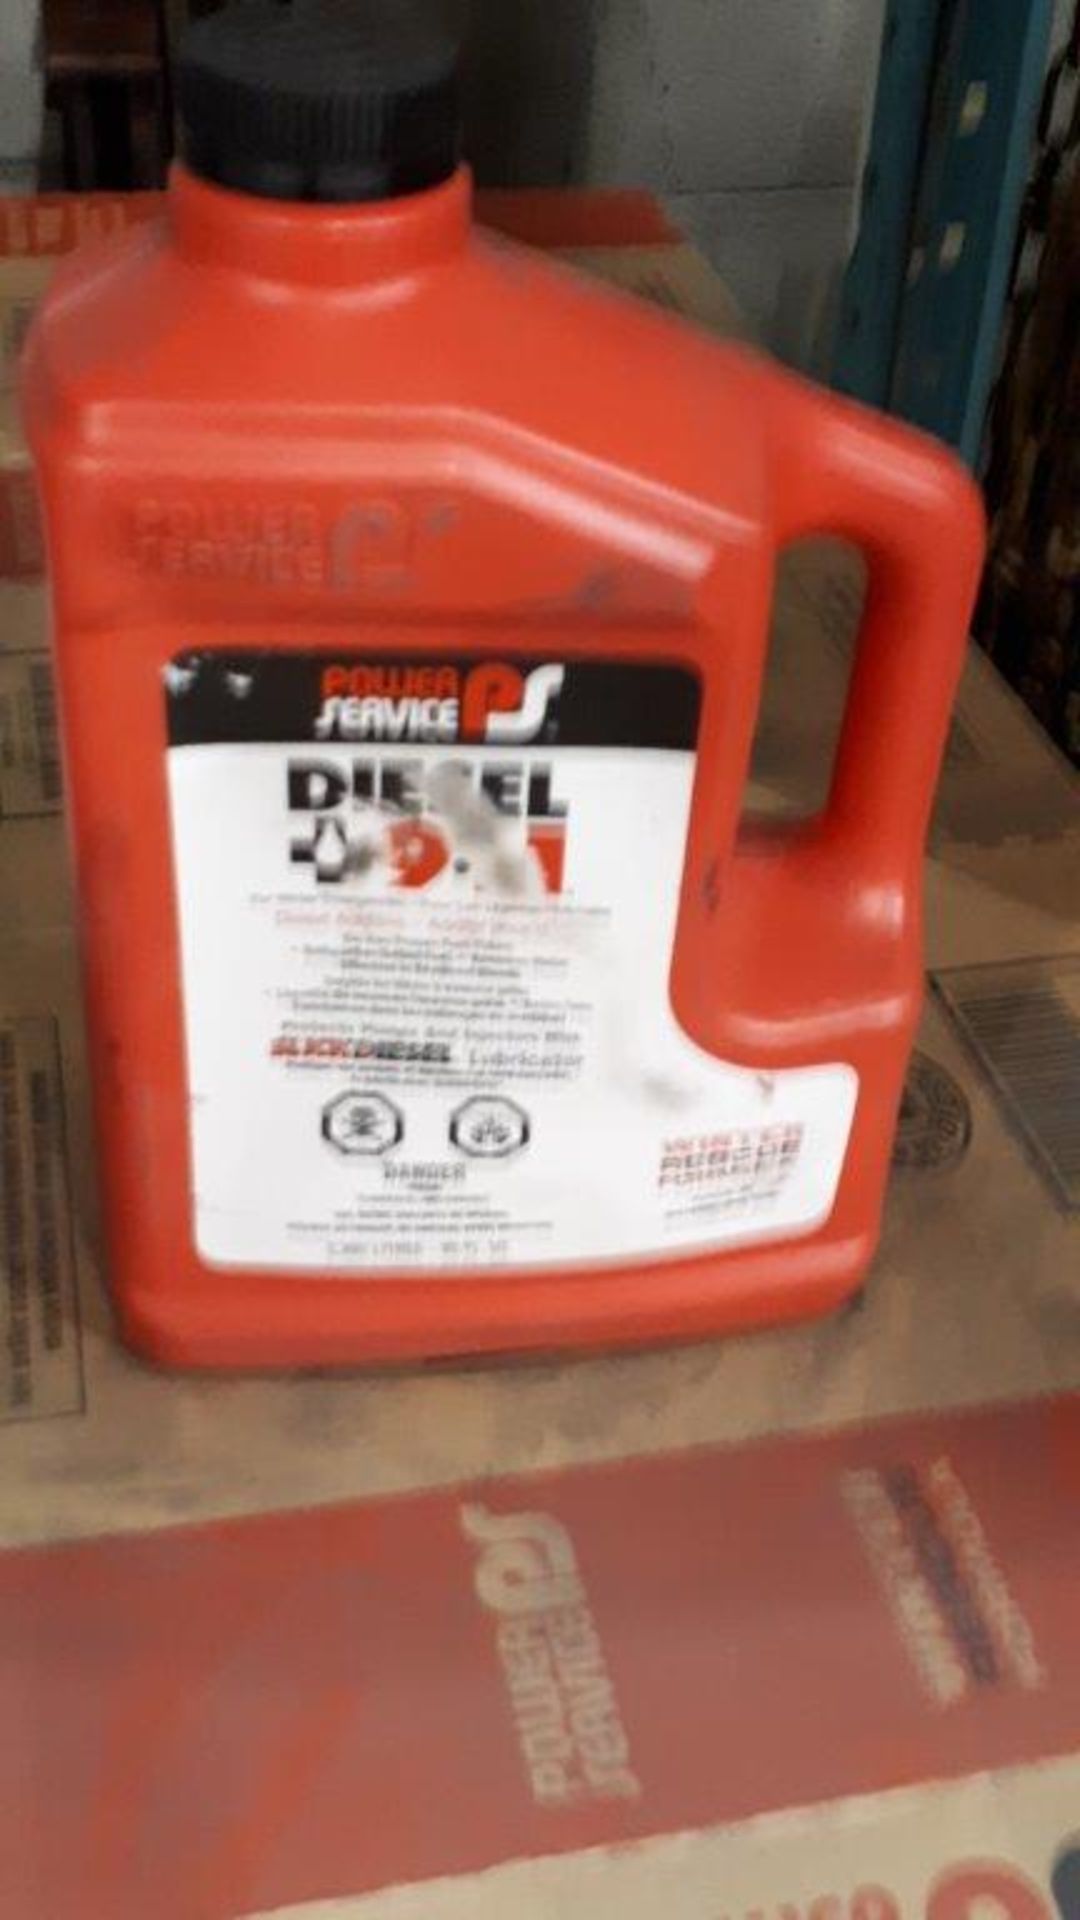 DIESEL+ 911 LUBRICATION, 2.385 lit. CONTAINERS